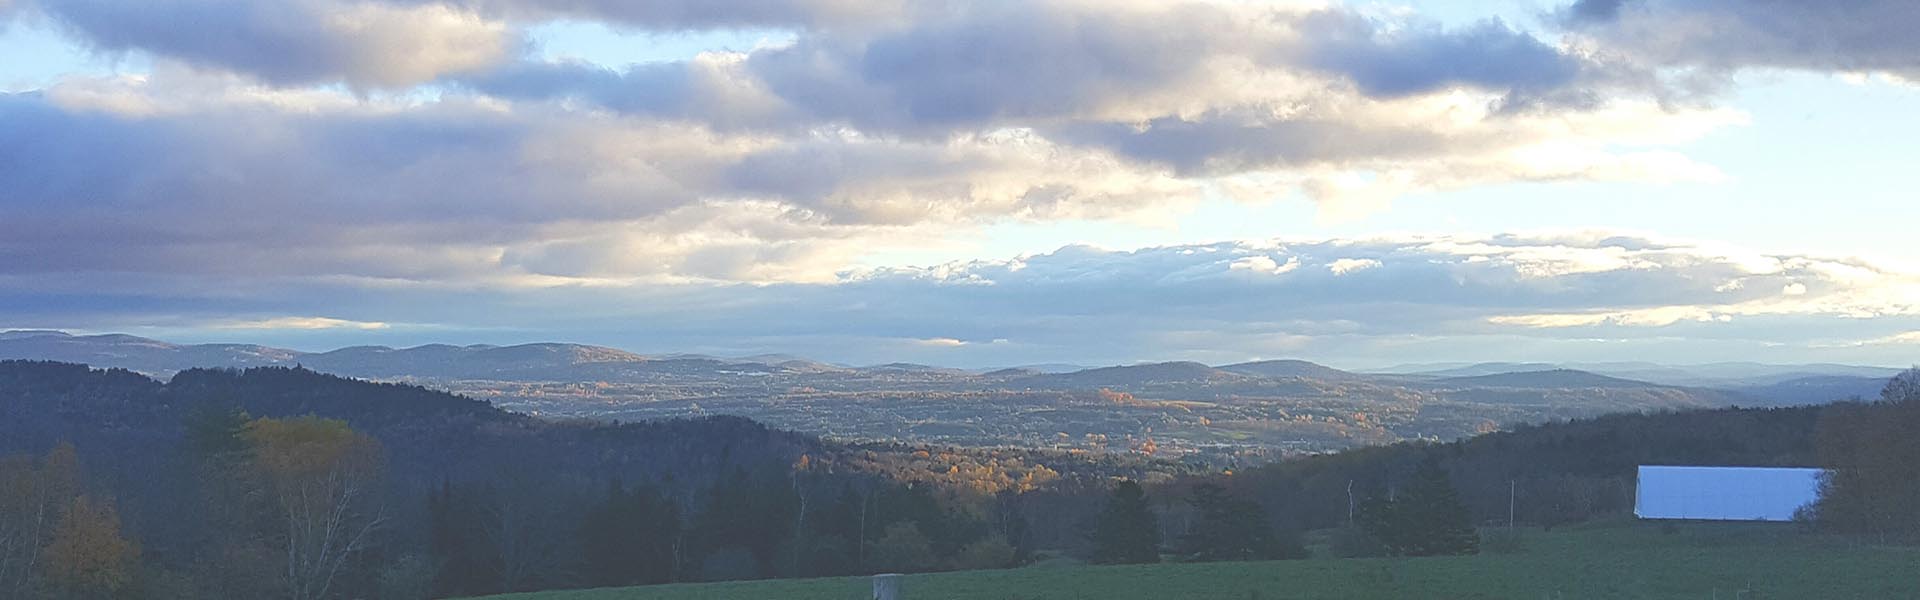 Vermont farm and mountains in the fall